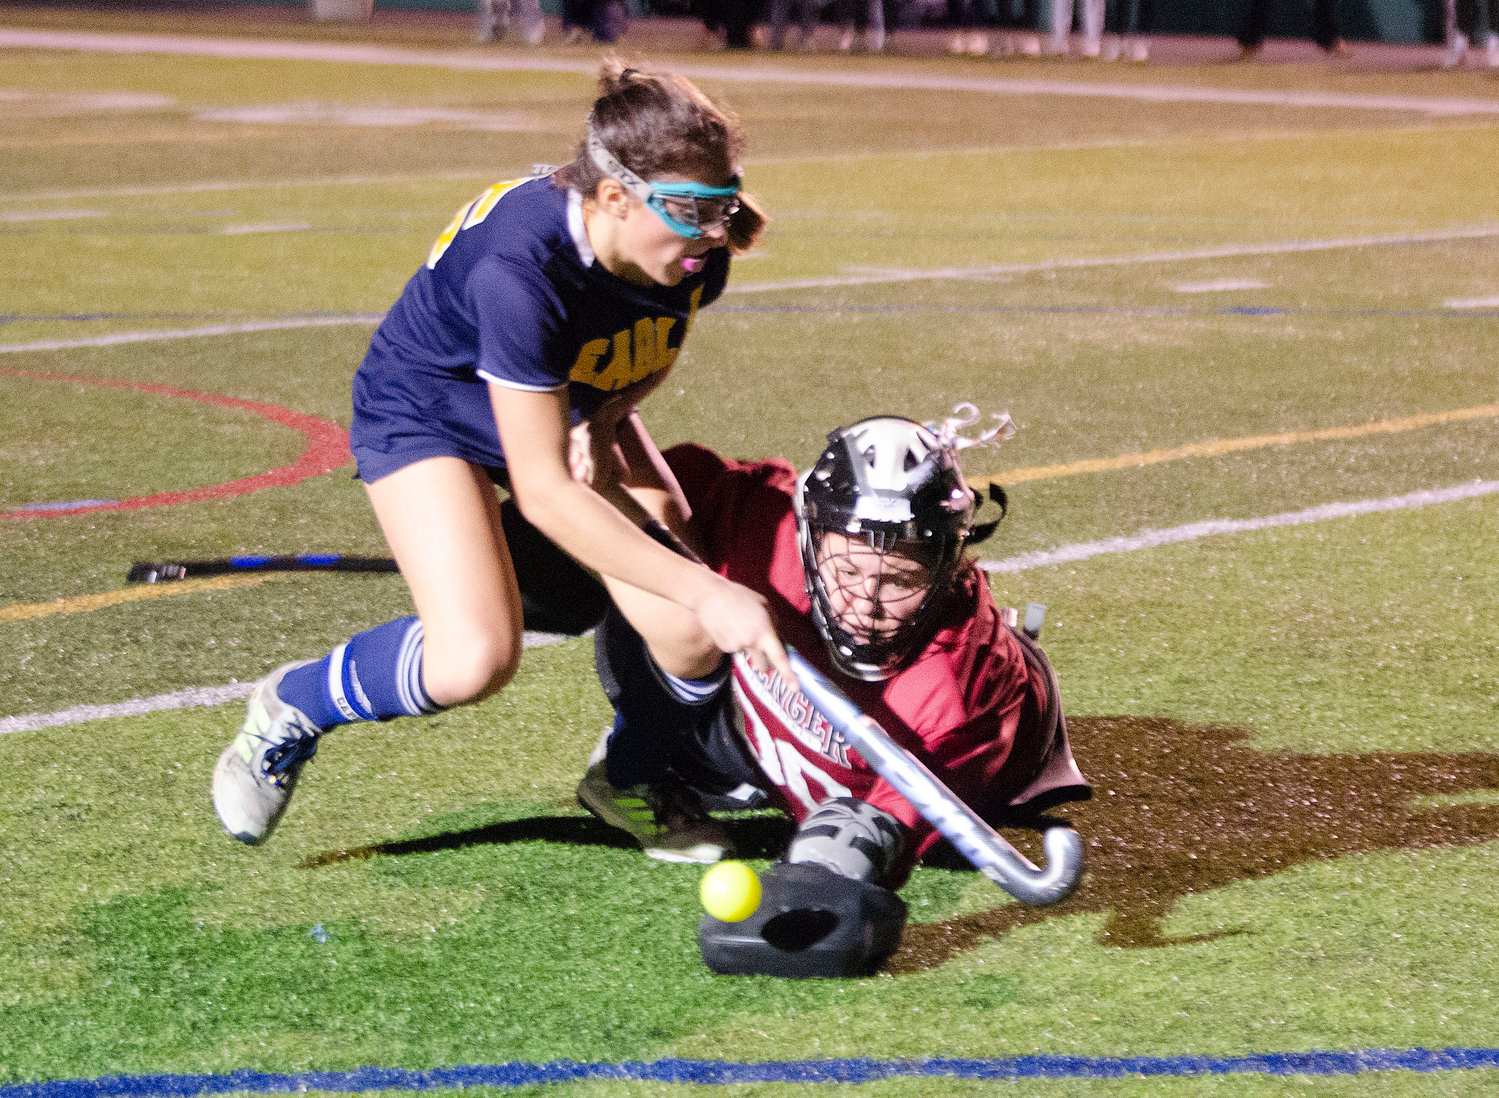 The Barrington High School field hockey team, shown playing on artificial turf in a playoff game, has taken it upon themselves to find an artificial turf field to practice on. The team raises money through cookie dough sales and other fund-raisers to pay rental fees for the artificial turf field in Seekonk. 